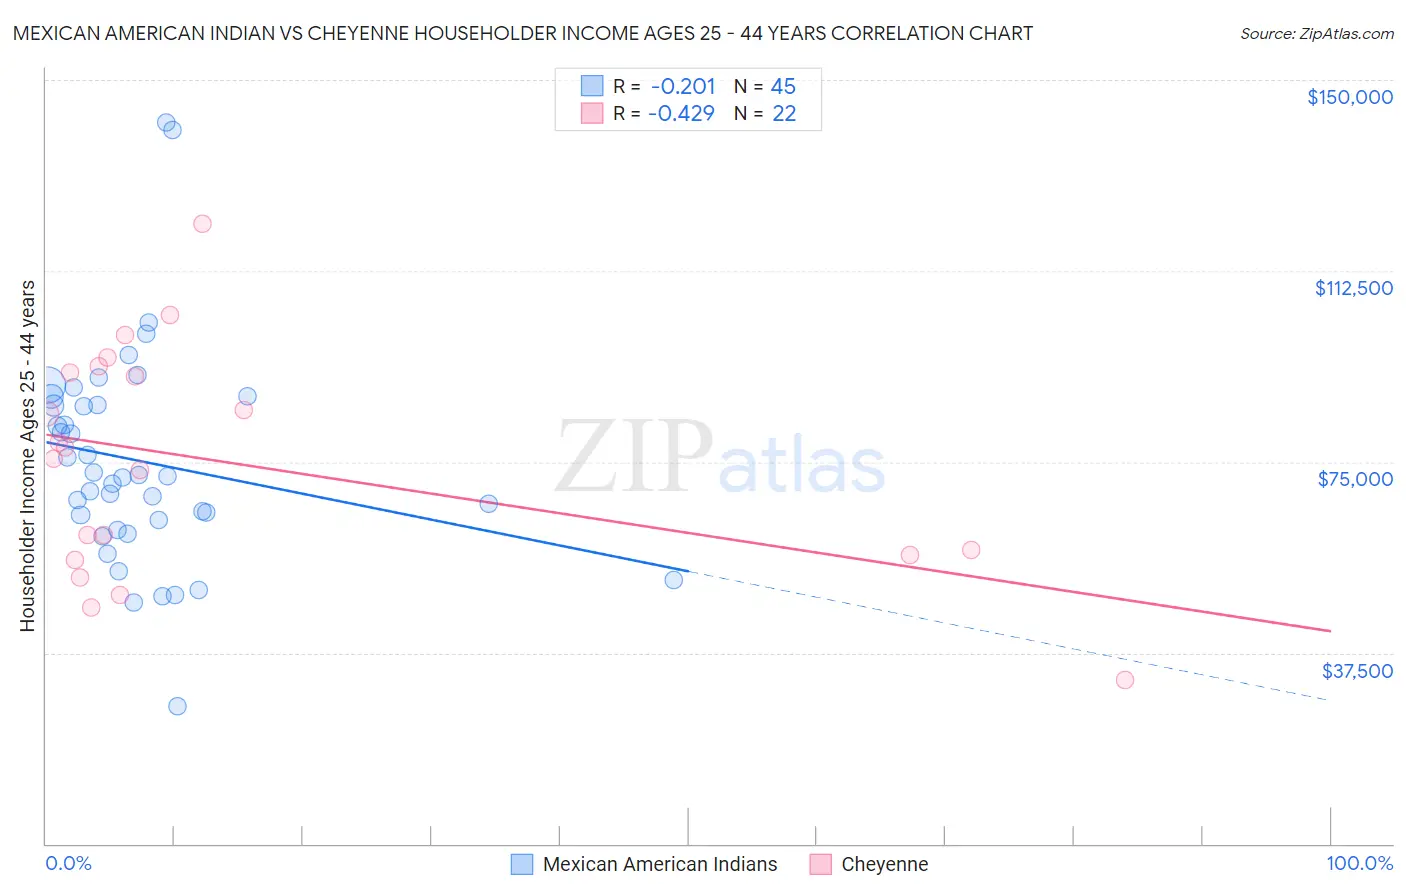 Mexican American Indian vs Cheyenne Householder Income Ages 25 - 44 years